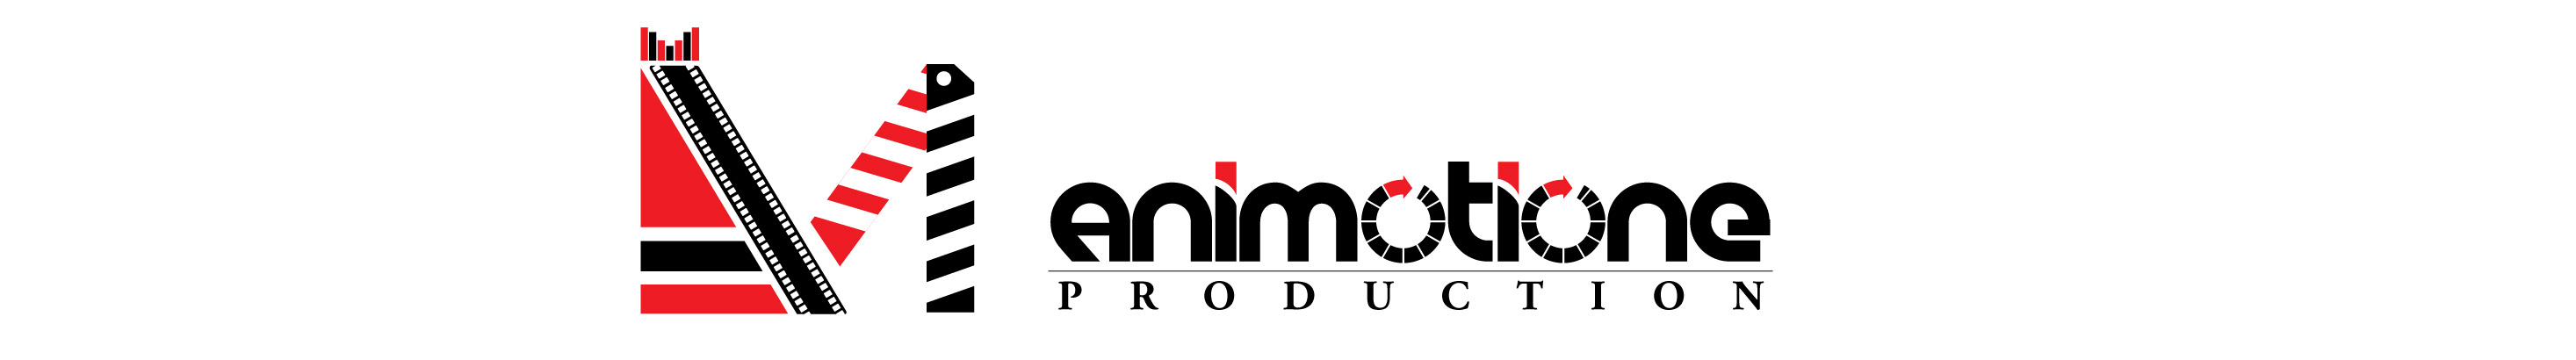 Animotione Production's profile banner